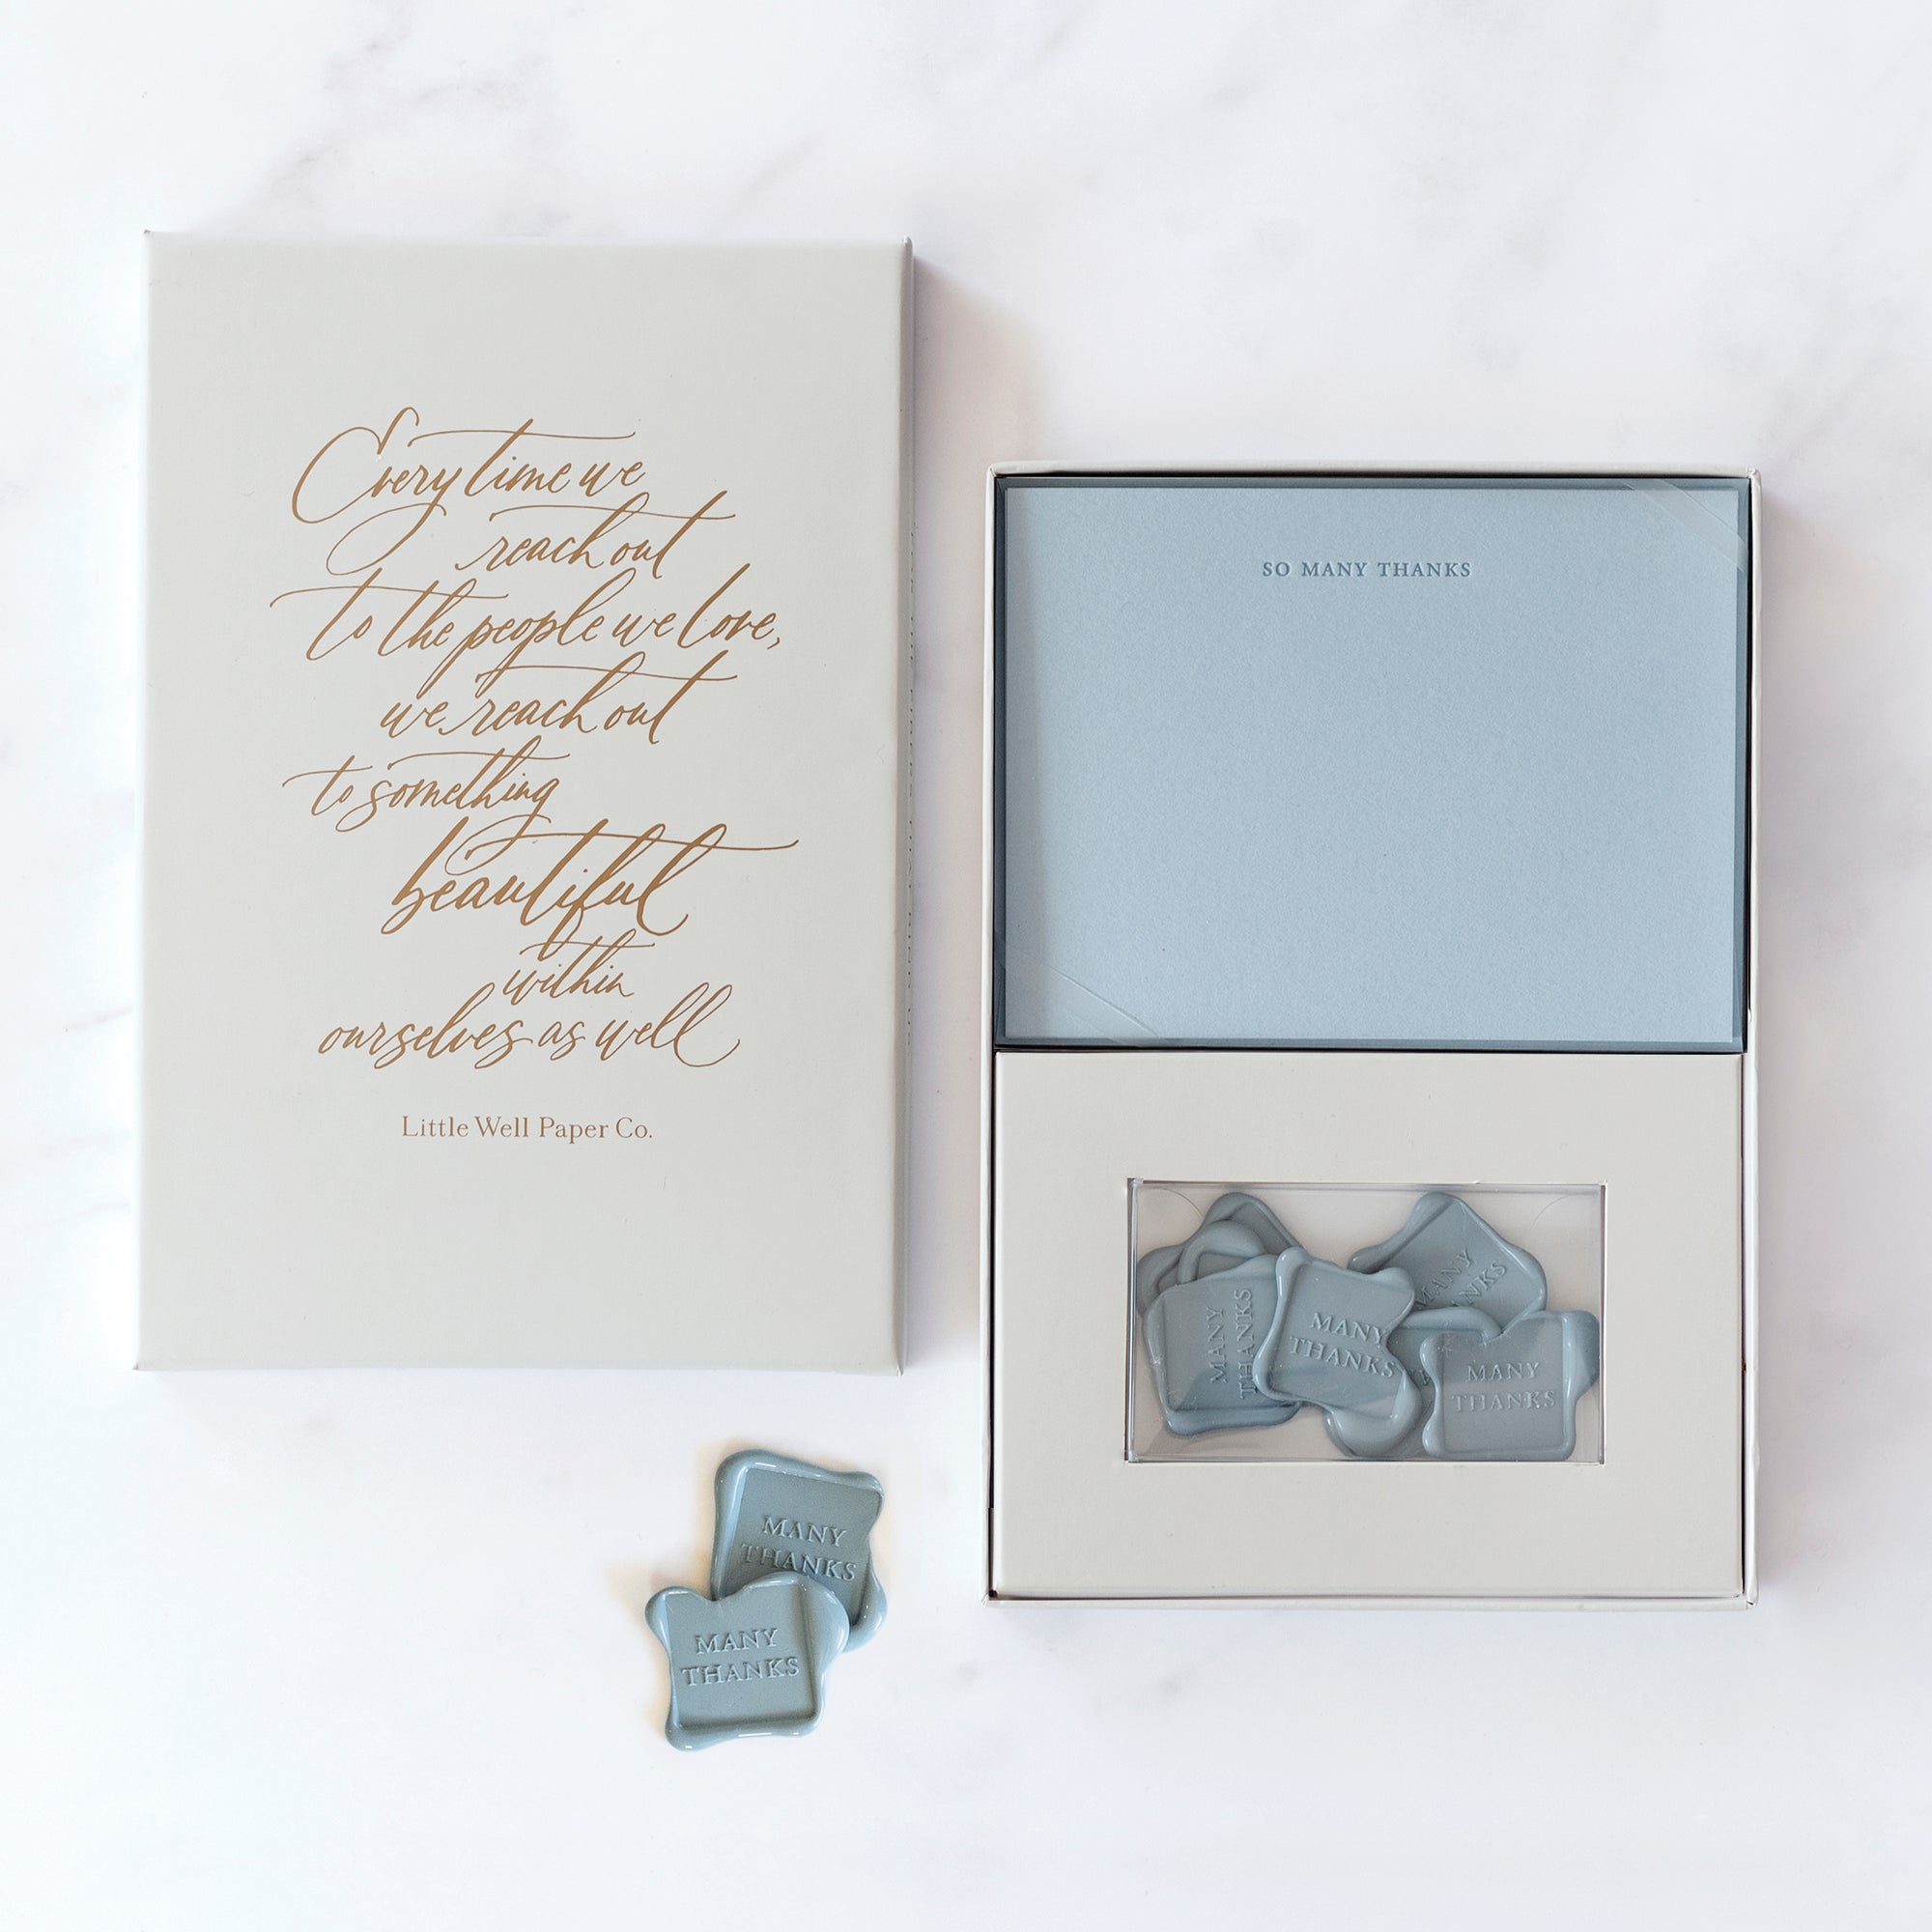 Our "Many Thanks" flat note stationery set includes a set of 6 hand printed cards and envelopes with 6 professional grade, self adhesive wax seals.